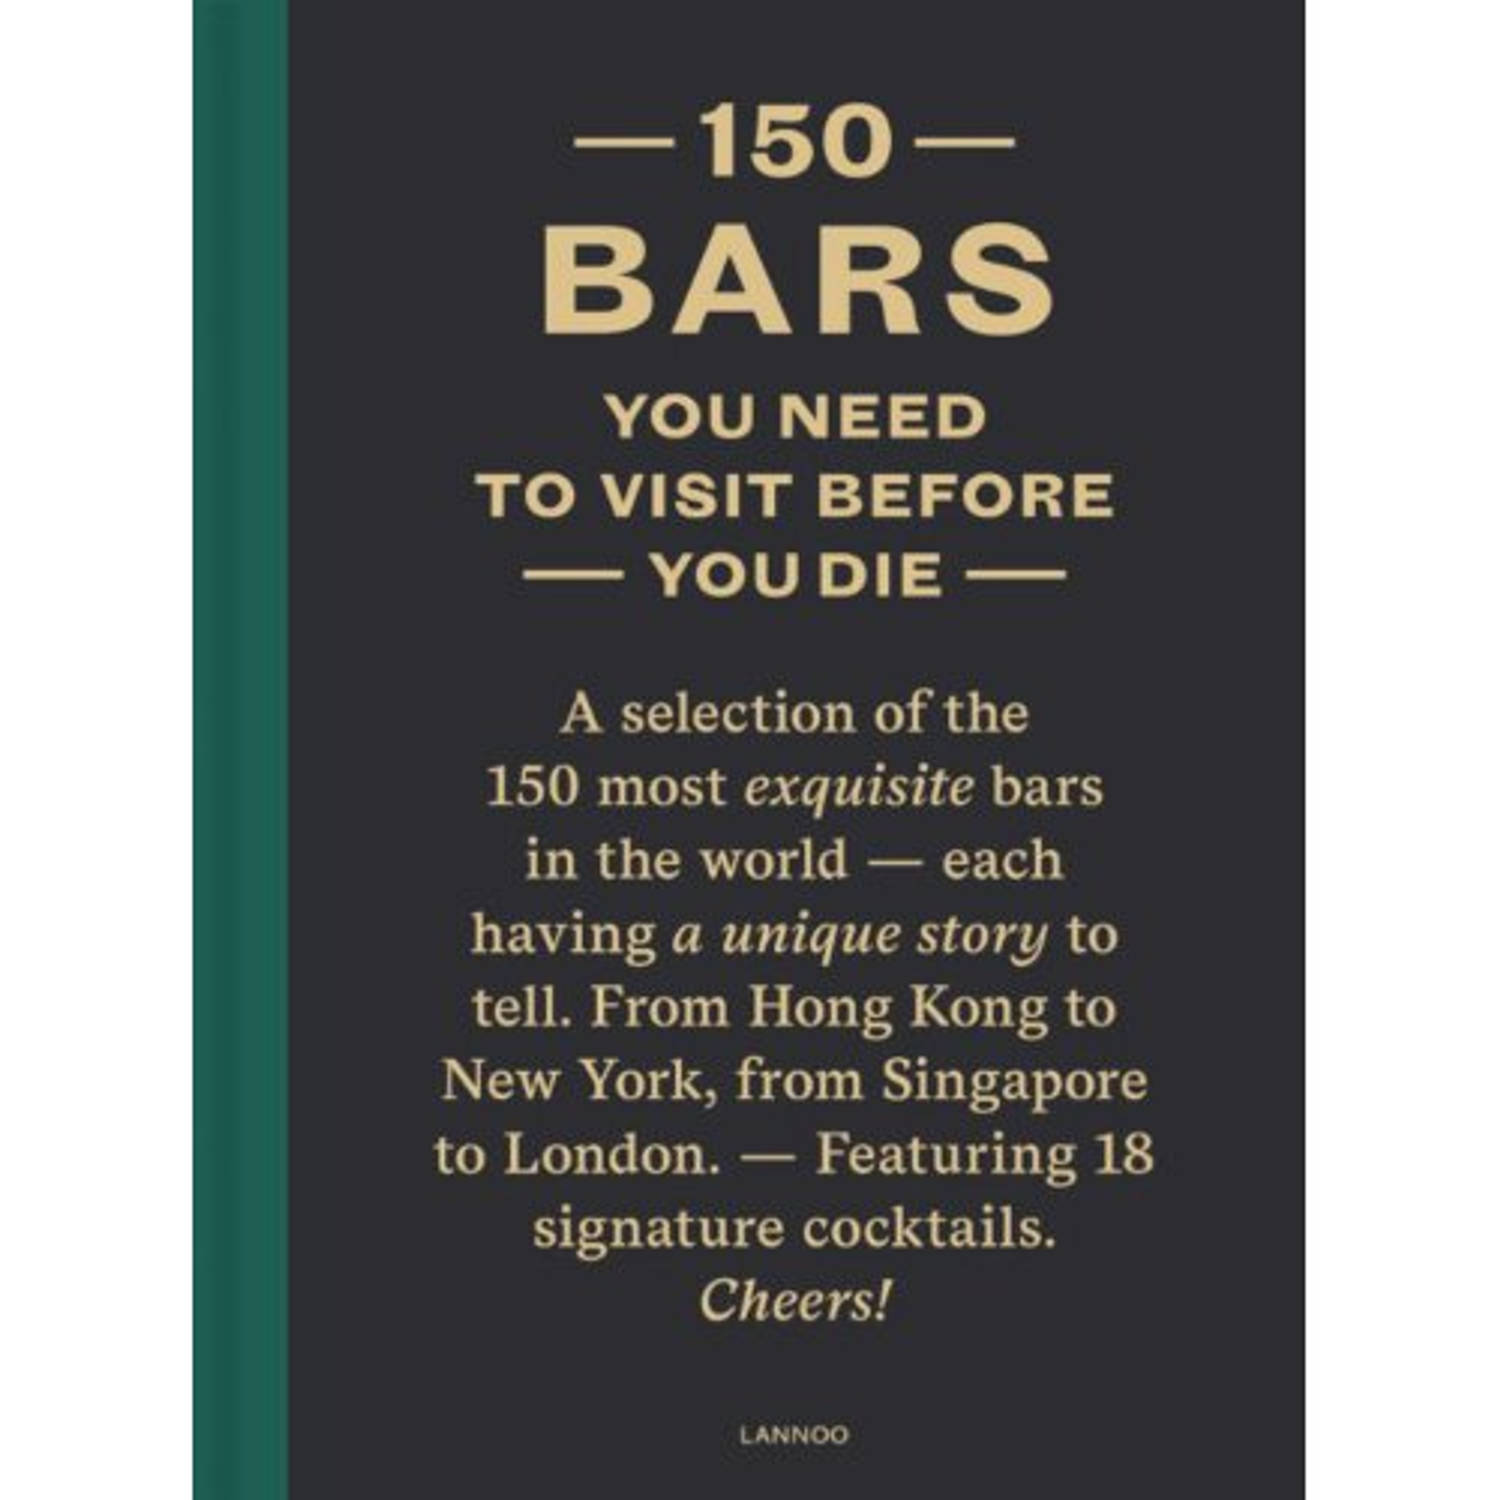 150 Bars You Need To Visit Before You Die